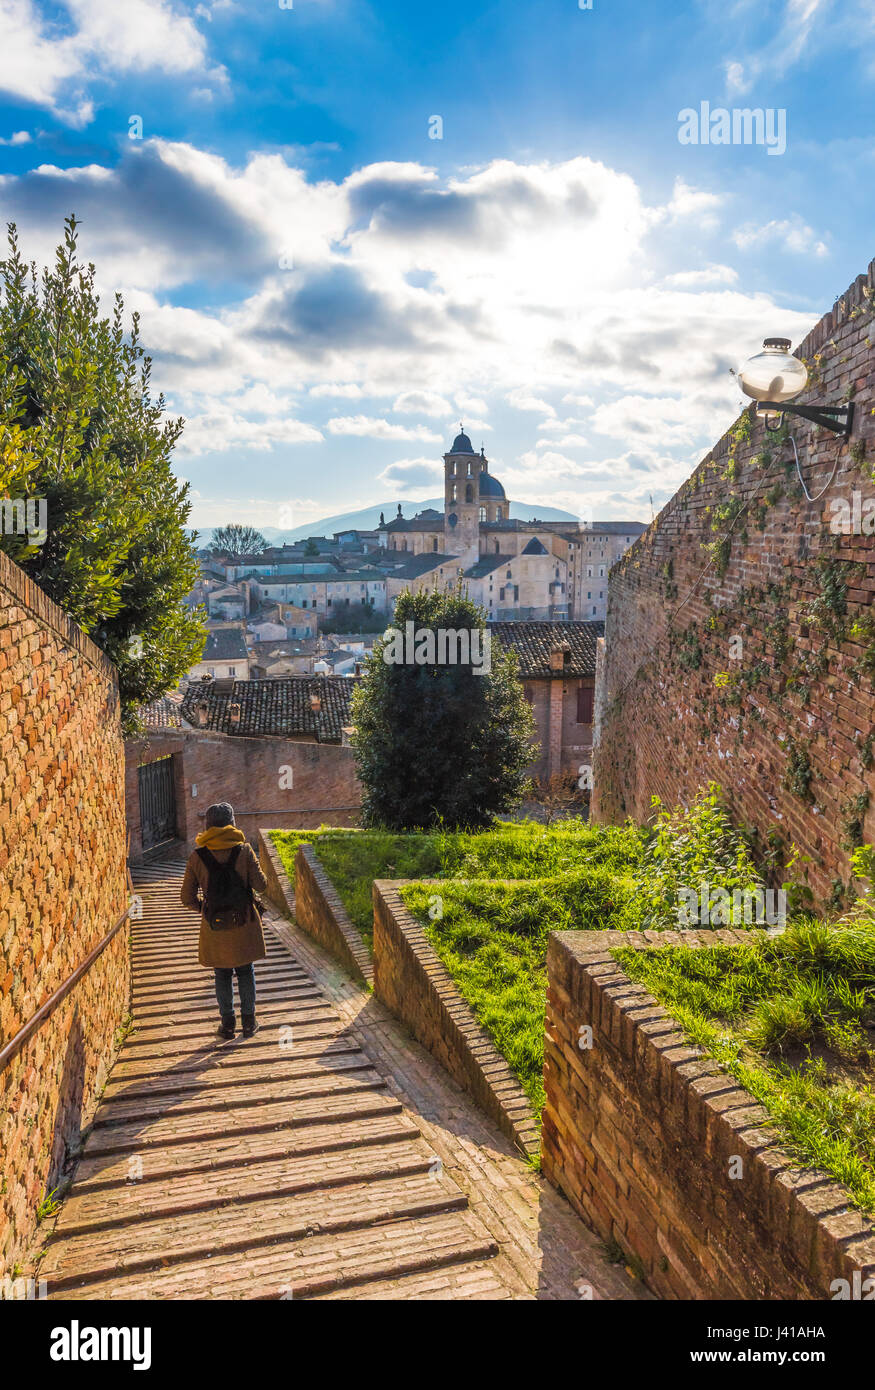 Urbino (Marche, Italy) - A walled city in the Marche region of Italy, a World Heritage Site notable for a remarkable historical legacy of Renaissance Stock Photo